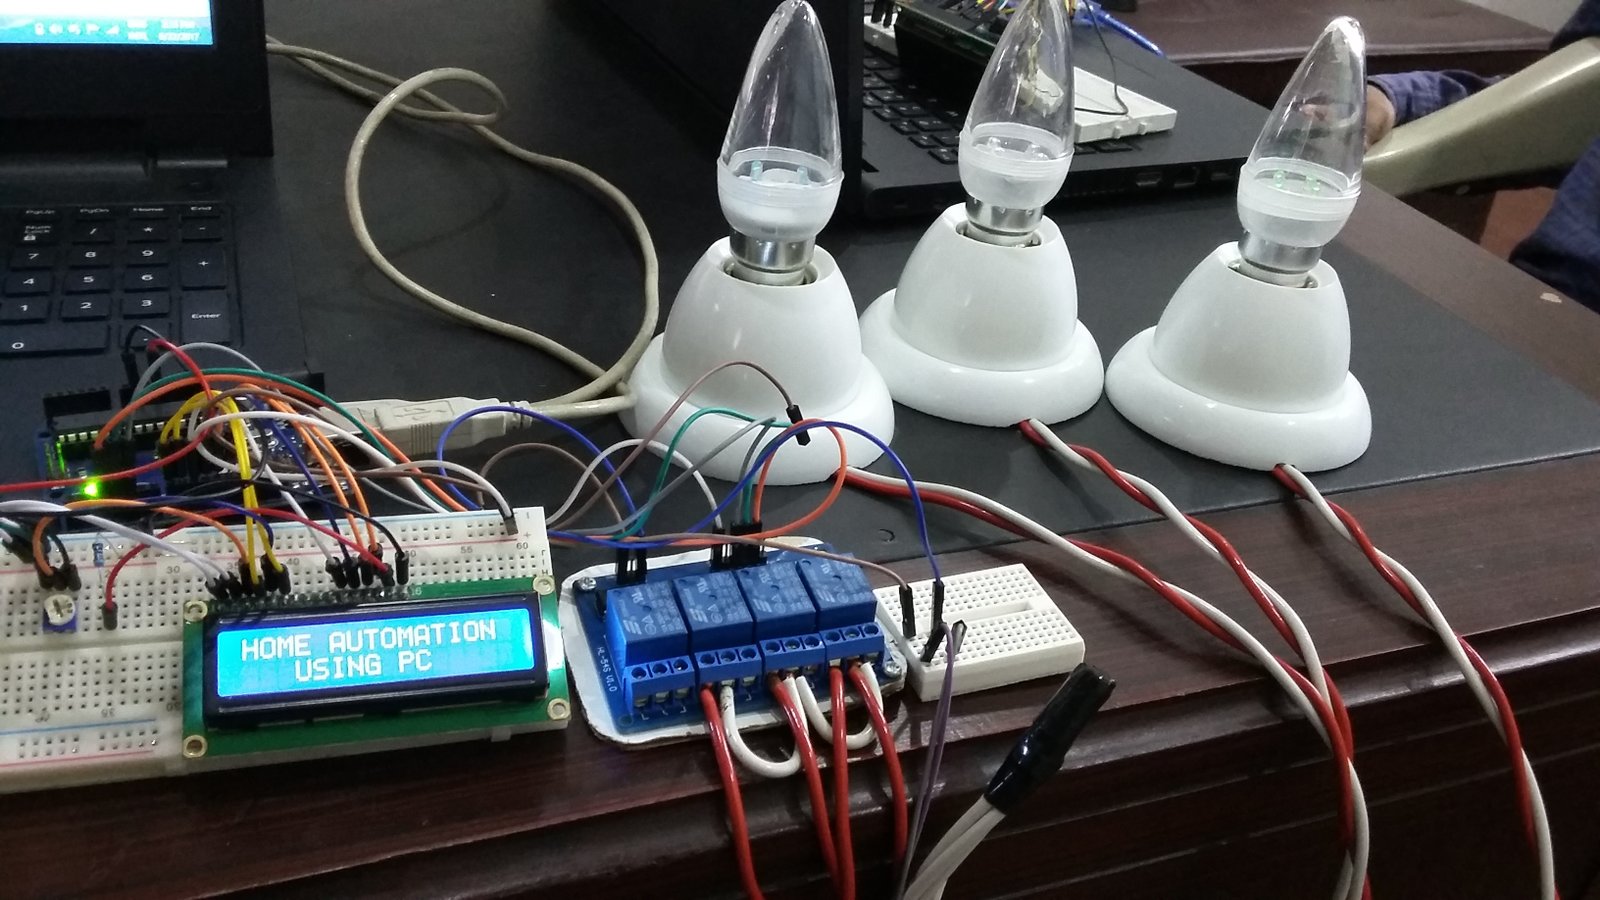 Welp PC based home automation using Arduino - project YG-01